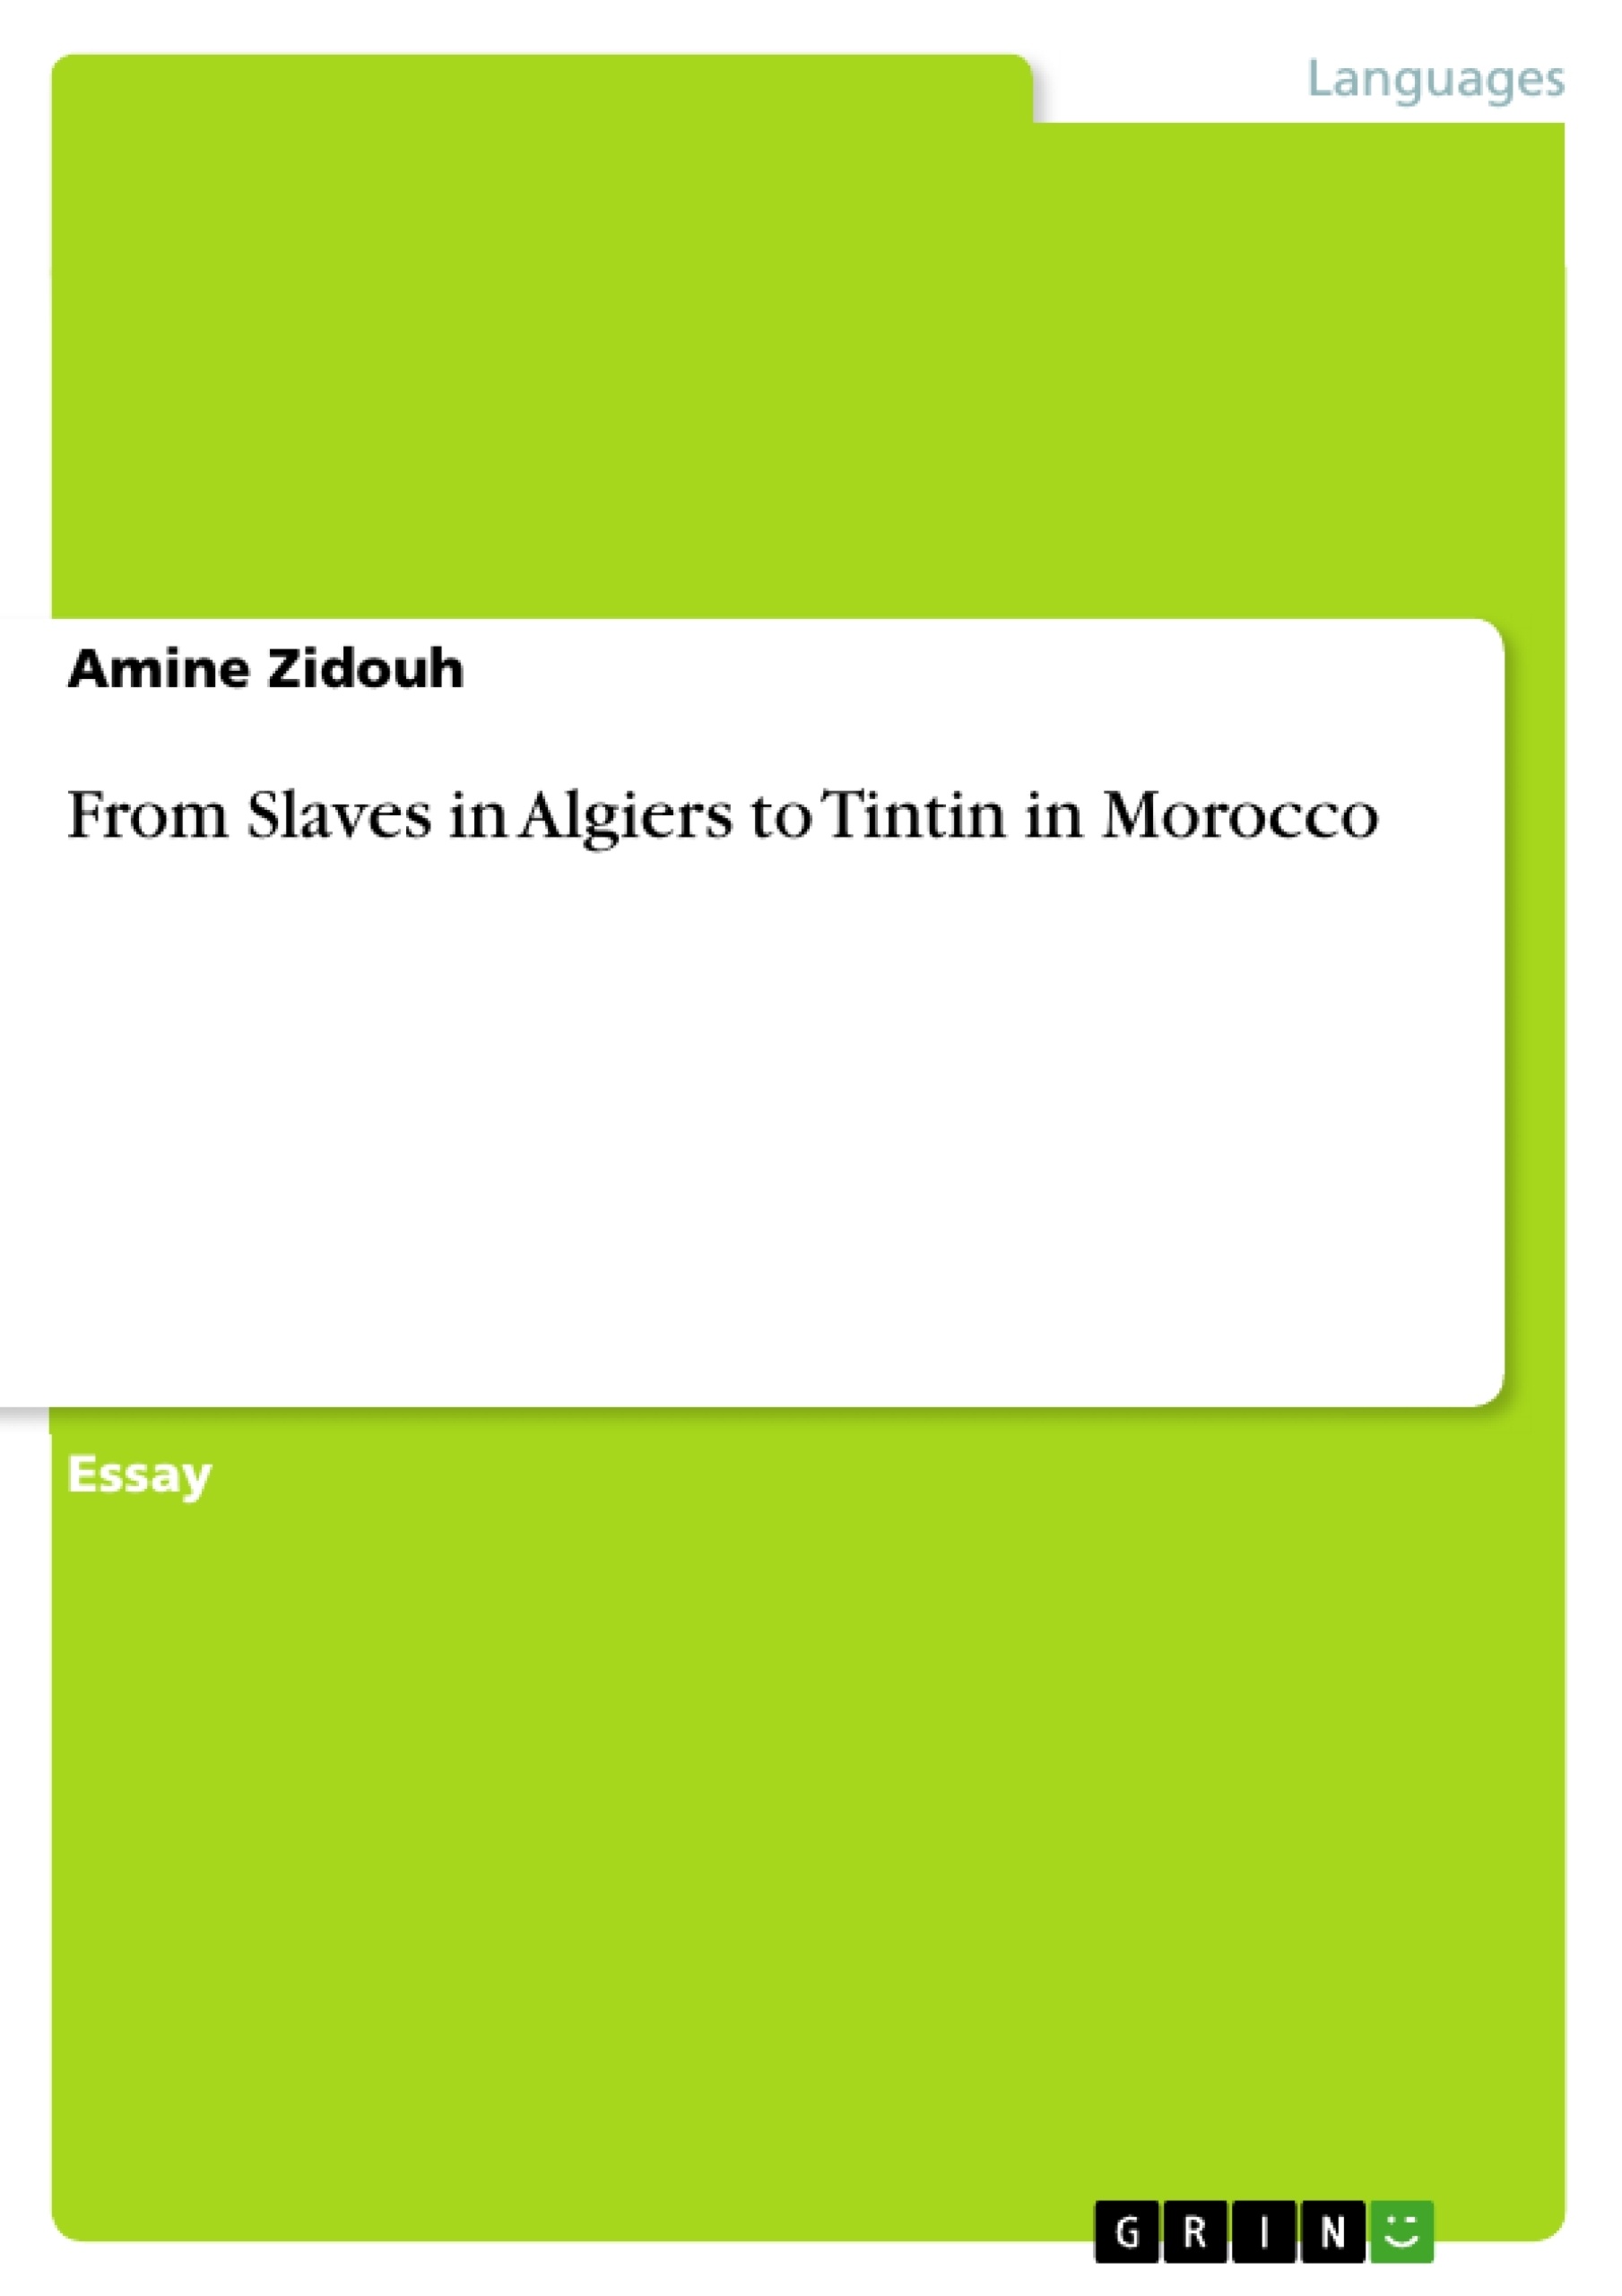 Título: From Slaves in Algiers to Tintin in Morocco